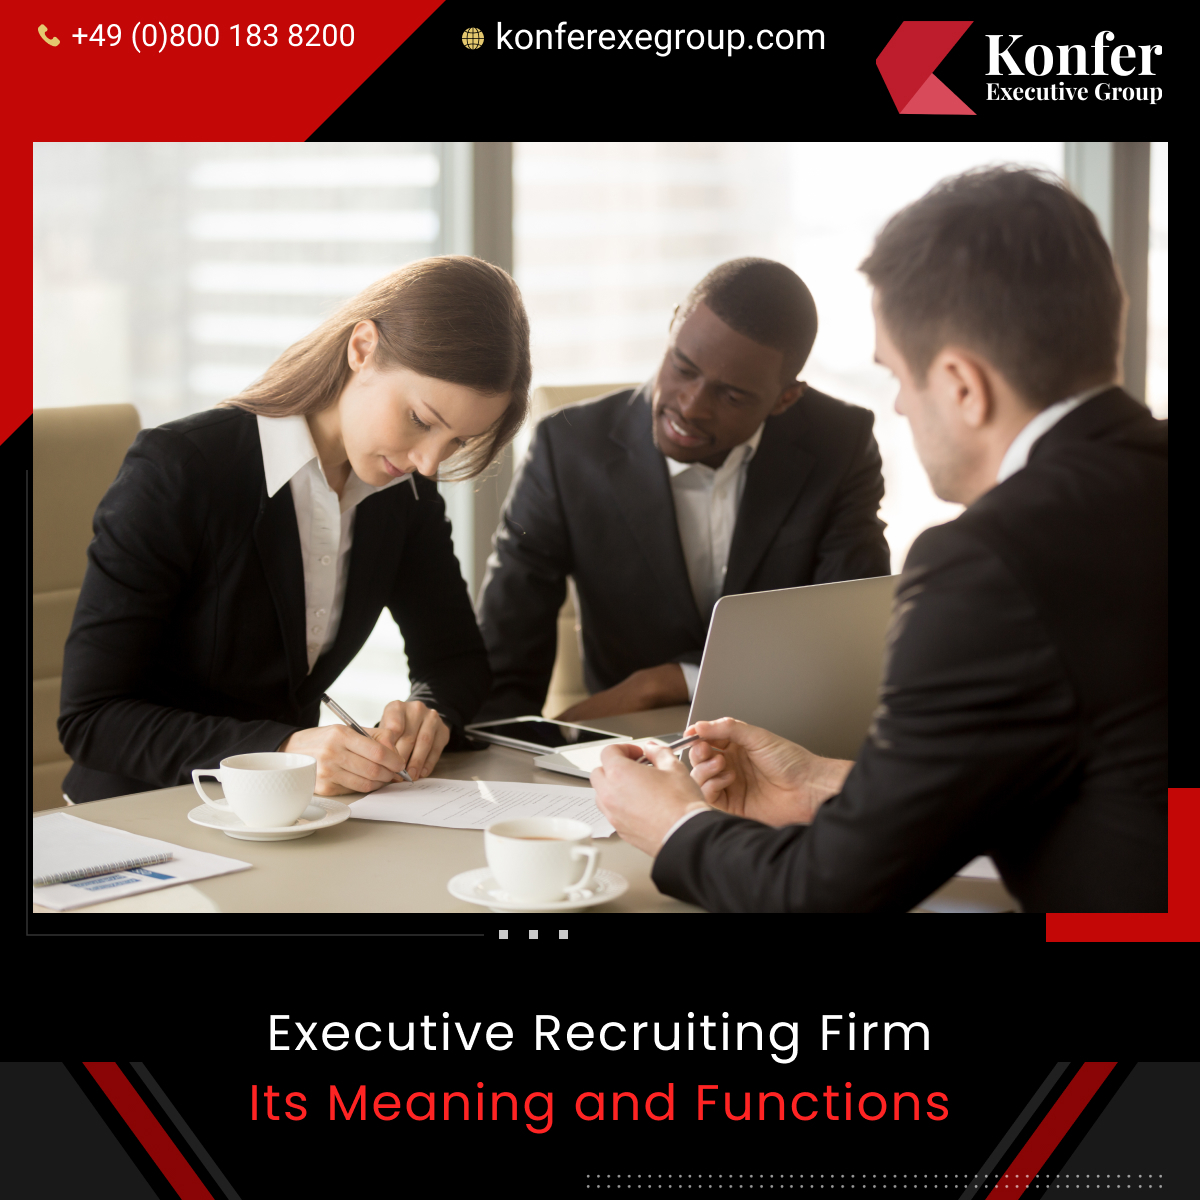 functions of firm